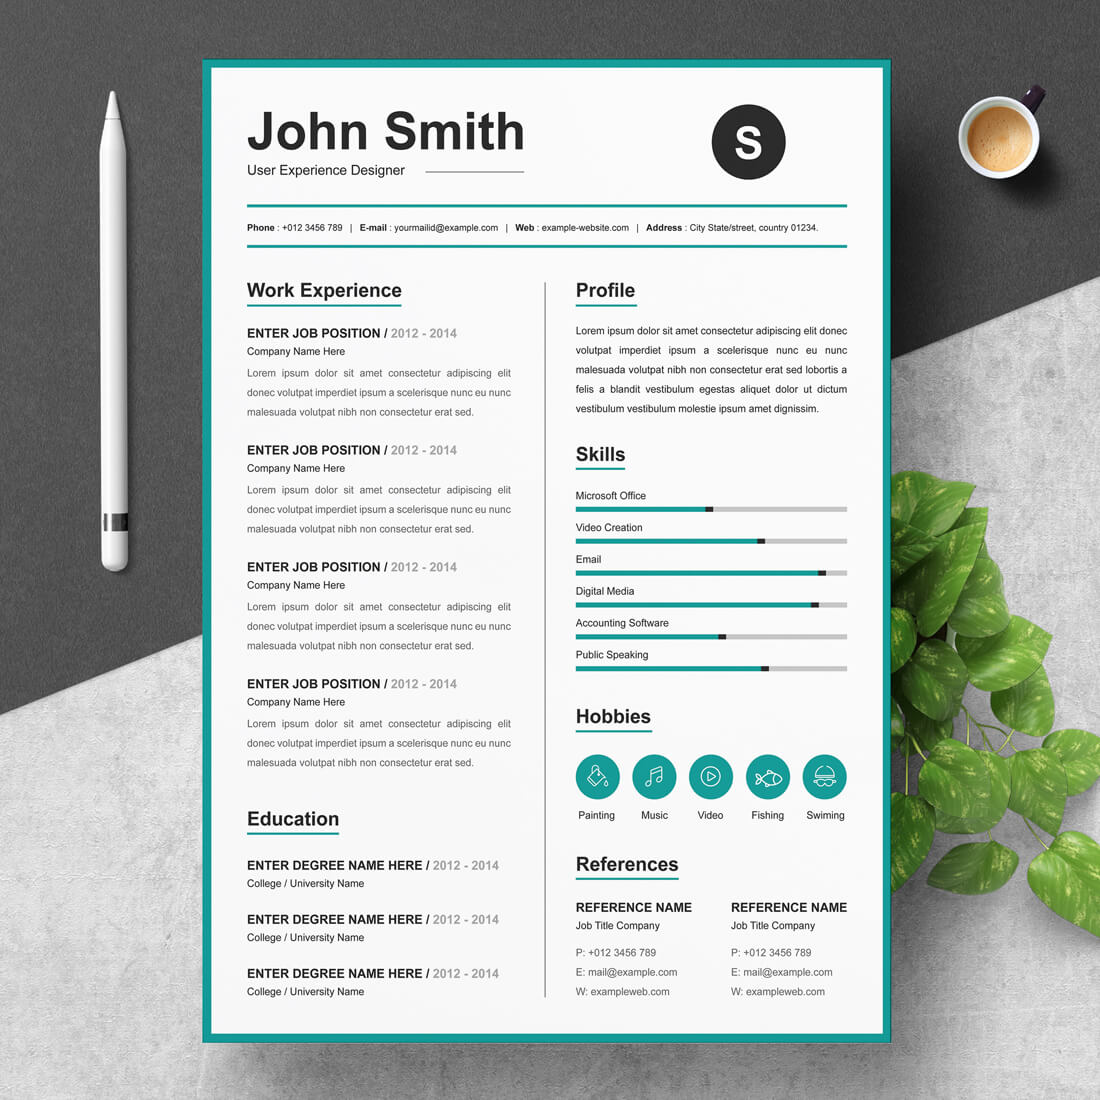 Green and white resume on a table next to a cup of coffee.